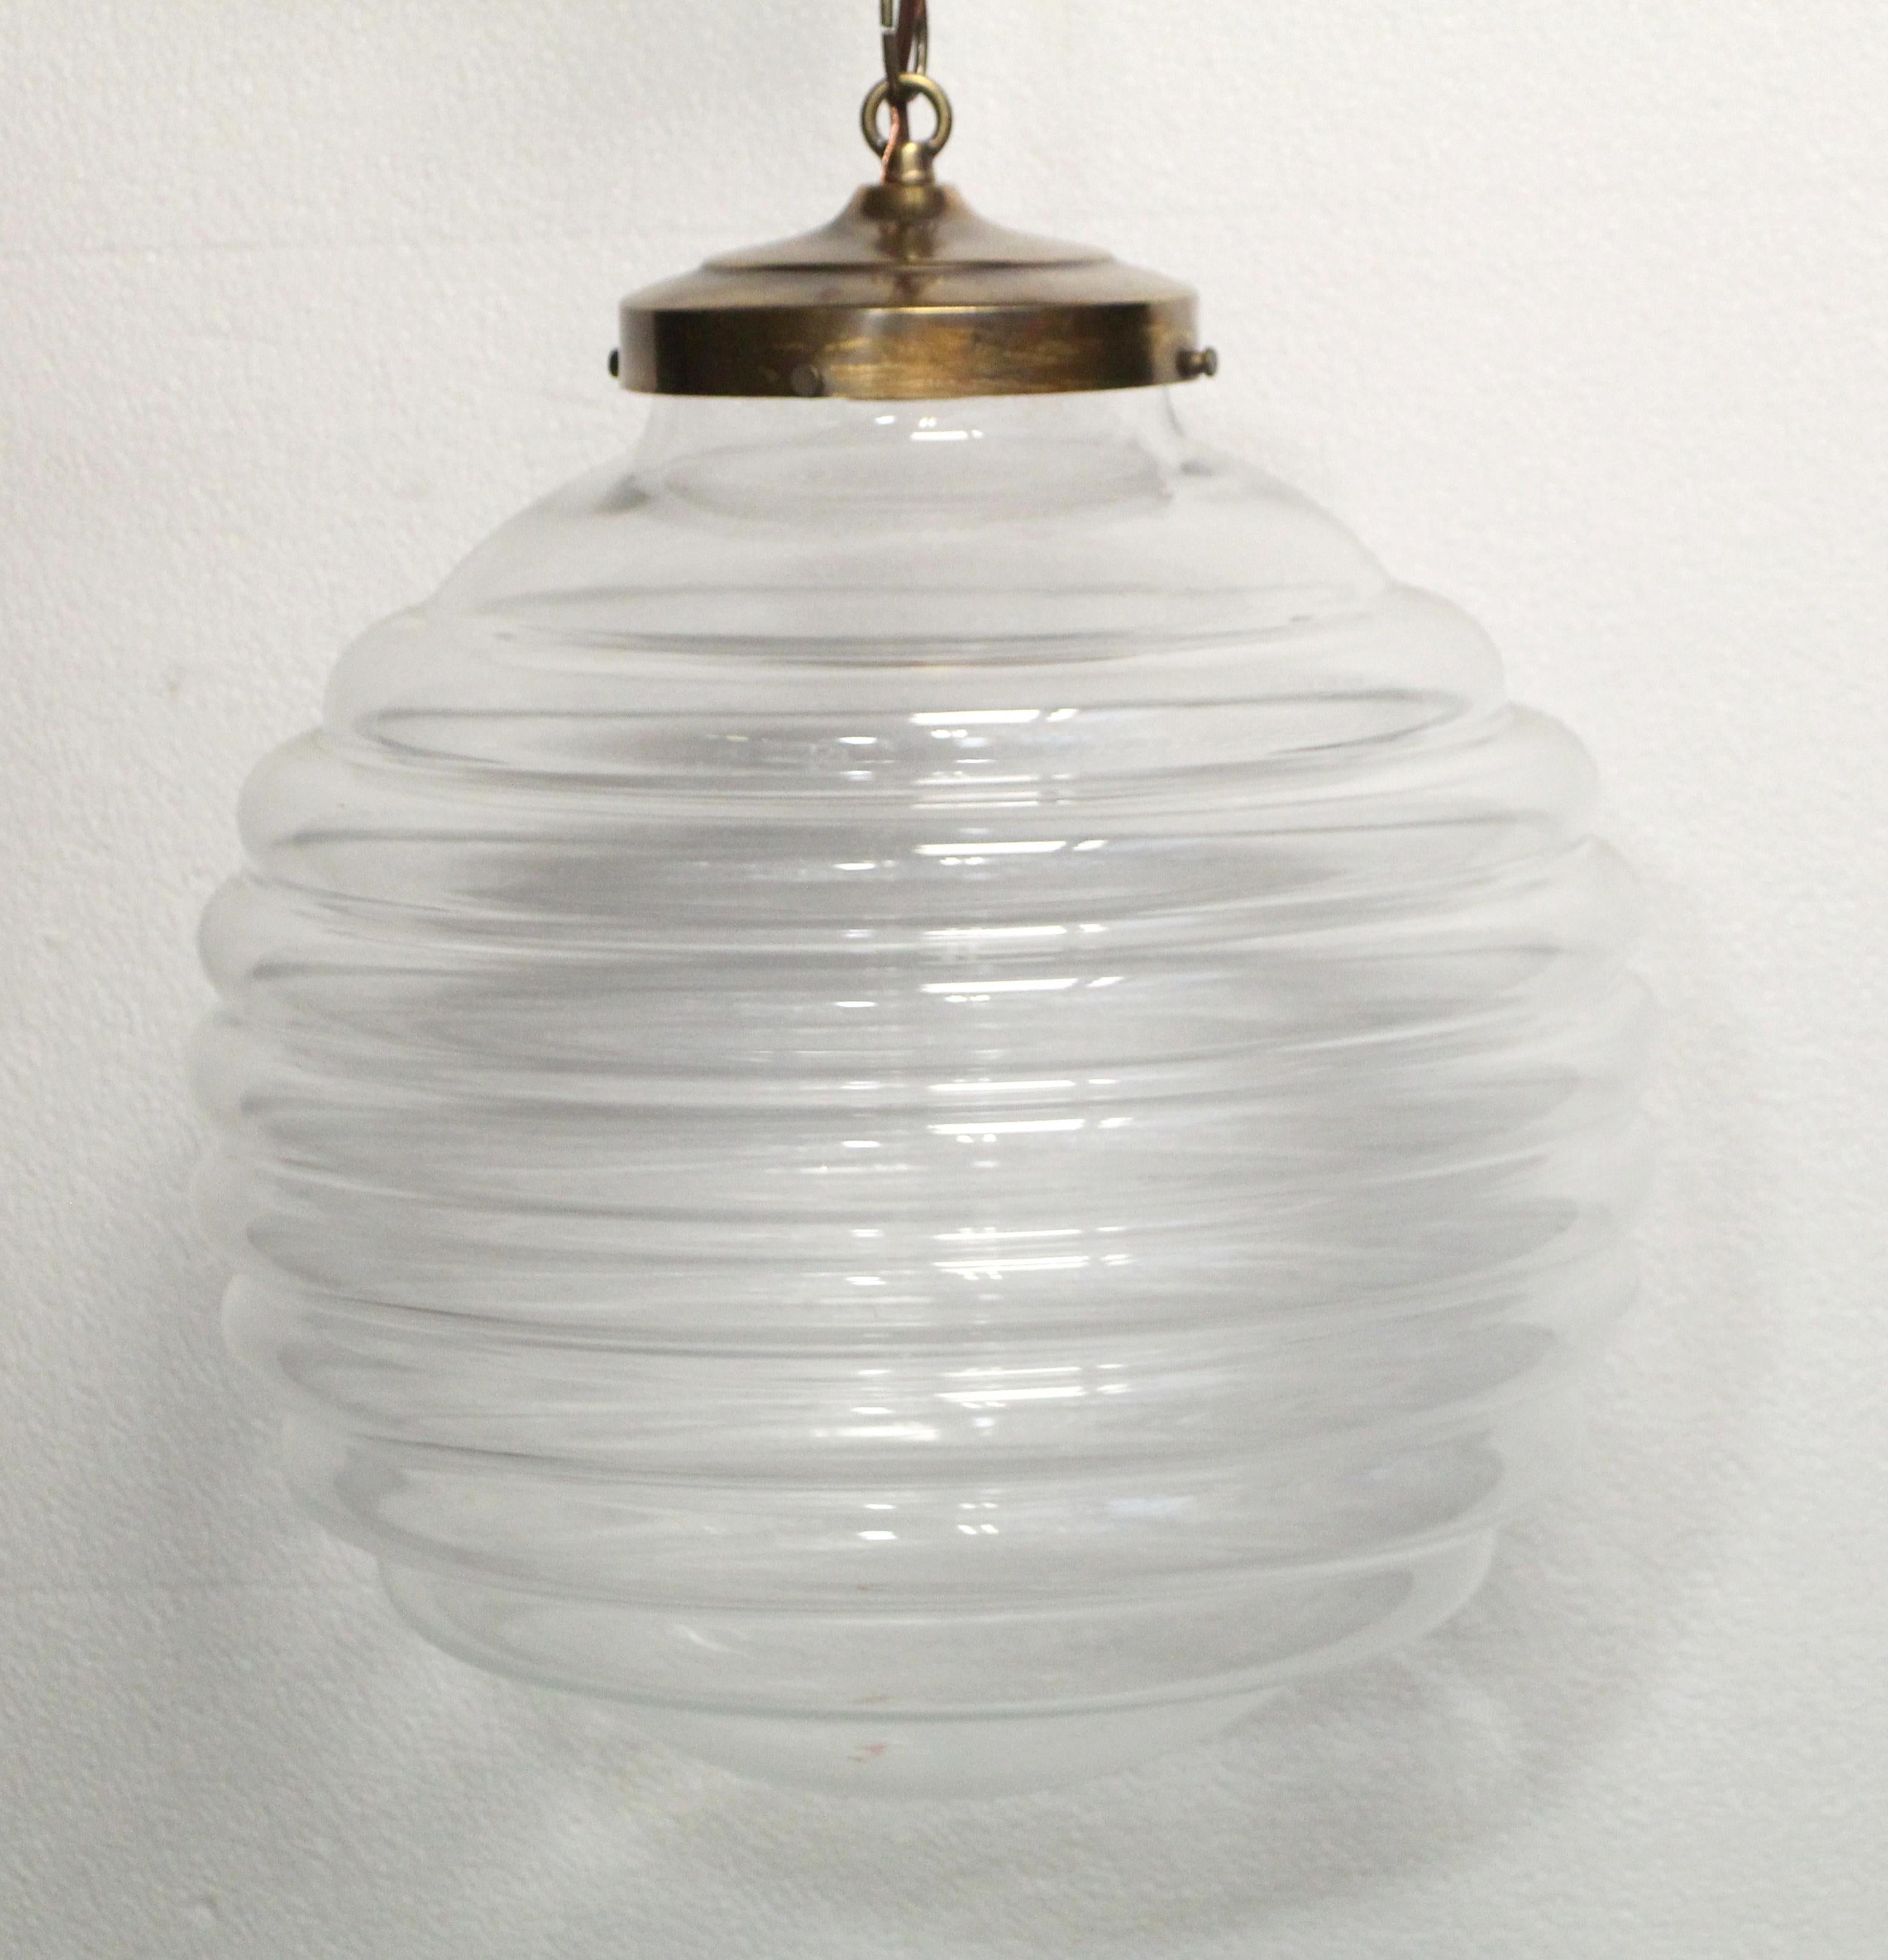 Large beehive shaped pendant light made of hand blown Italian crystal done in a Mid-Century Modern style. The fitter with chain is done in an antique brass finish. This can also be made in nickel or brushed steel finish, with a chain or pole of your